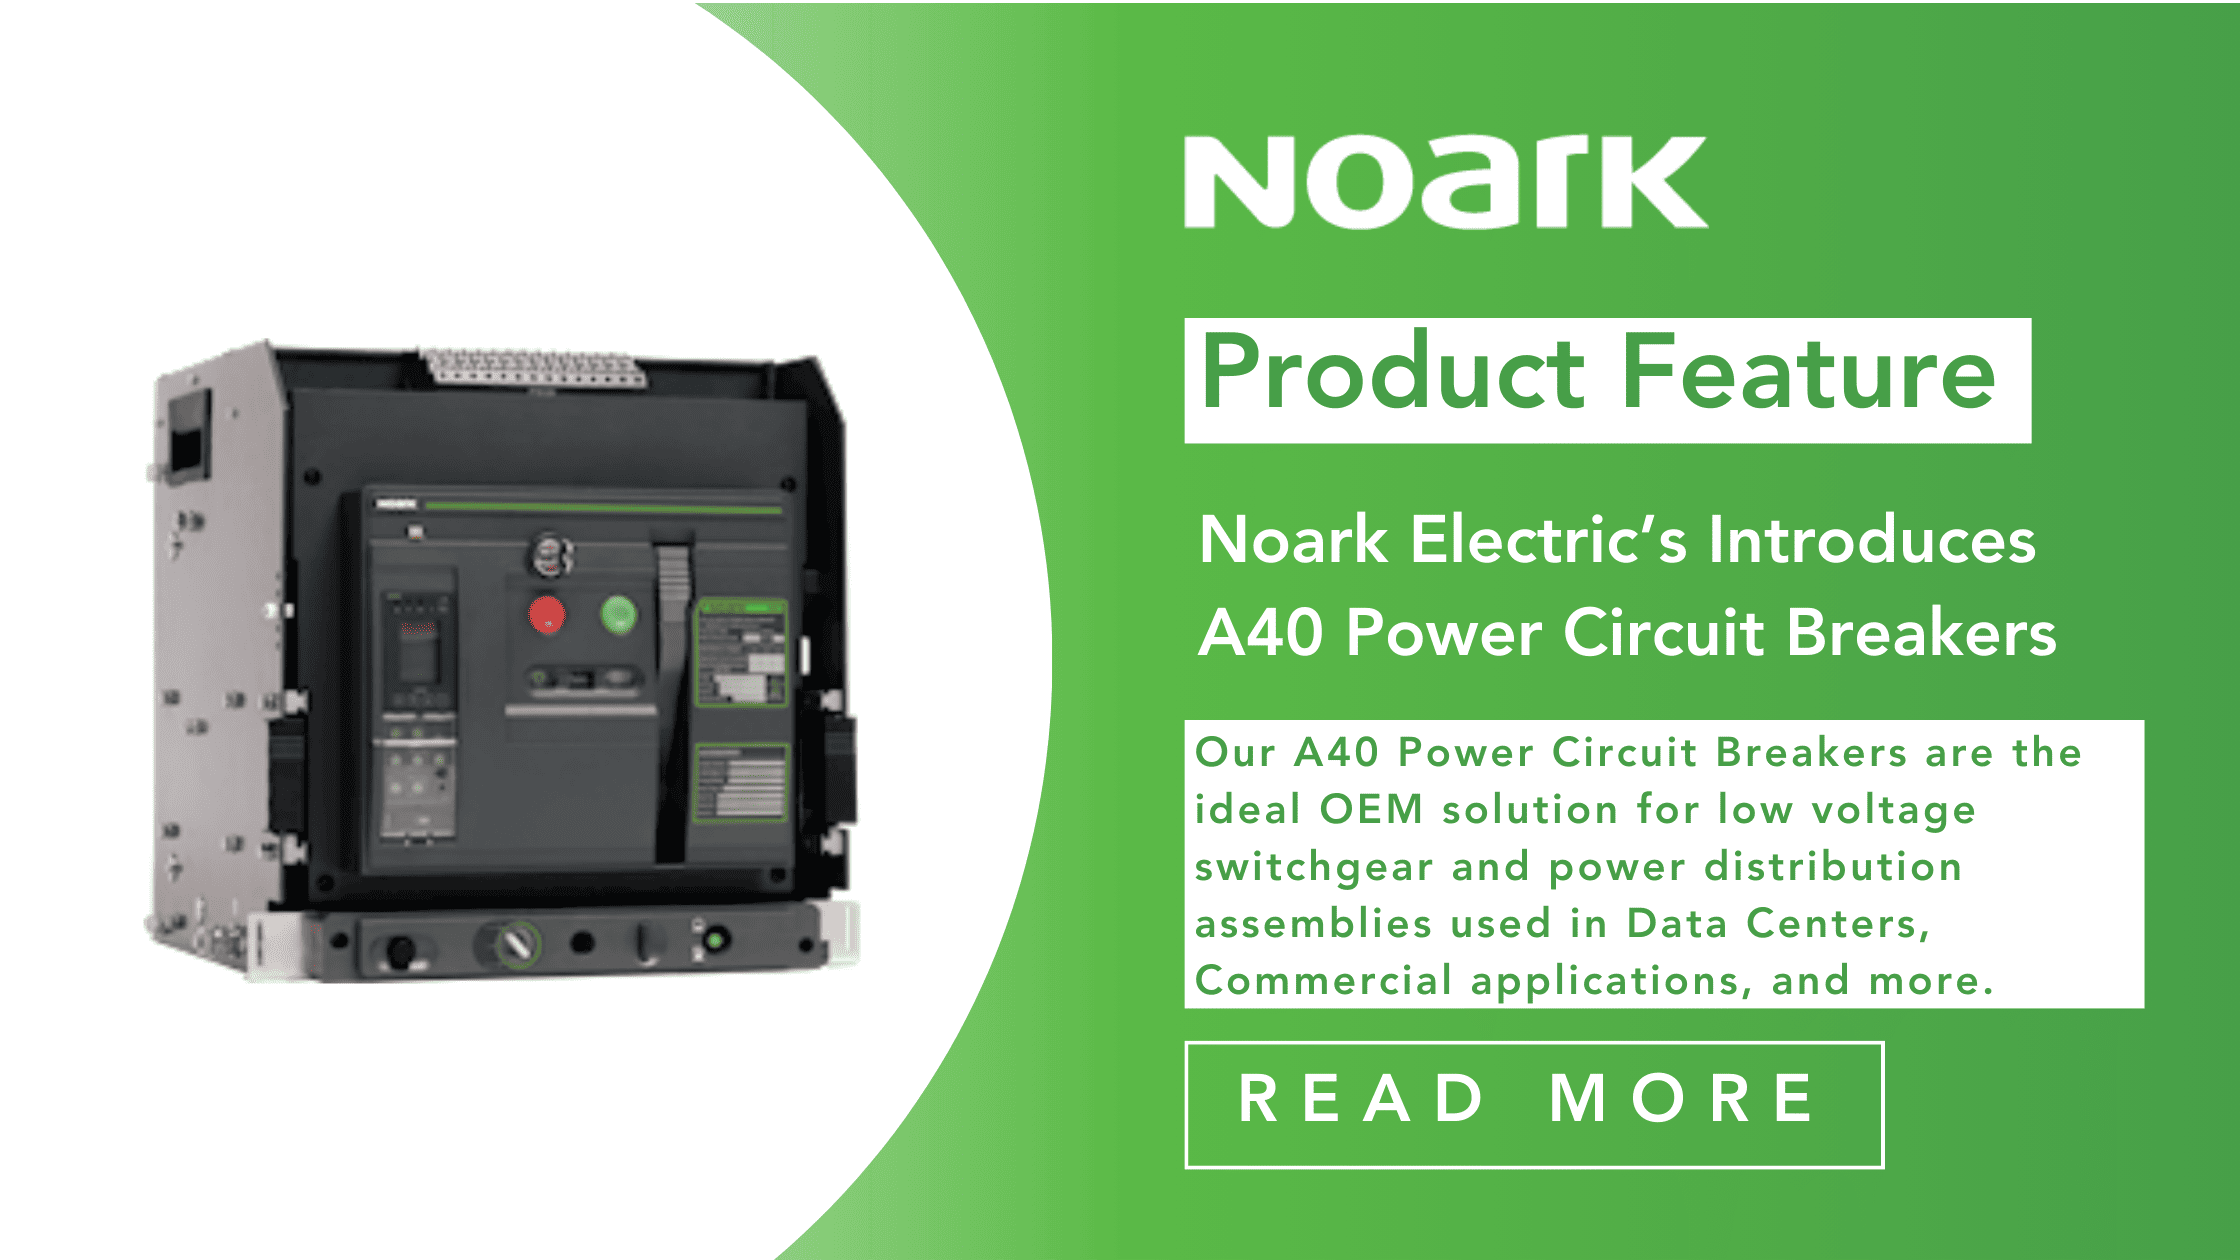 Noark Electric’s Introduces A40 Power Circuit Breakers